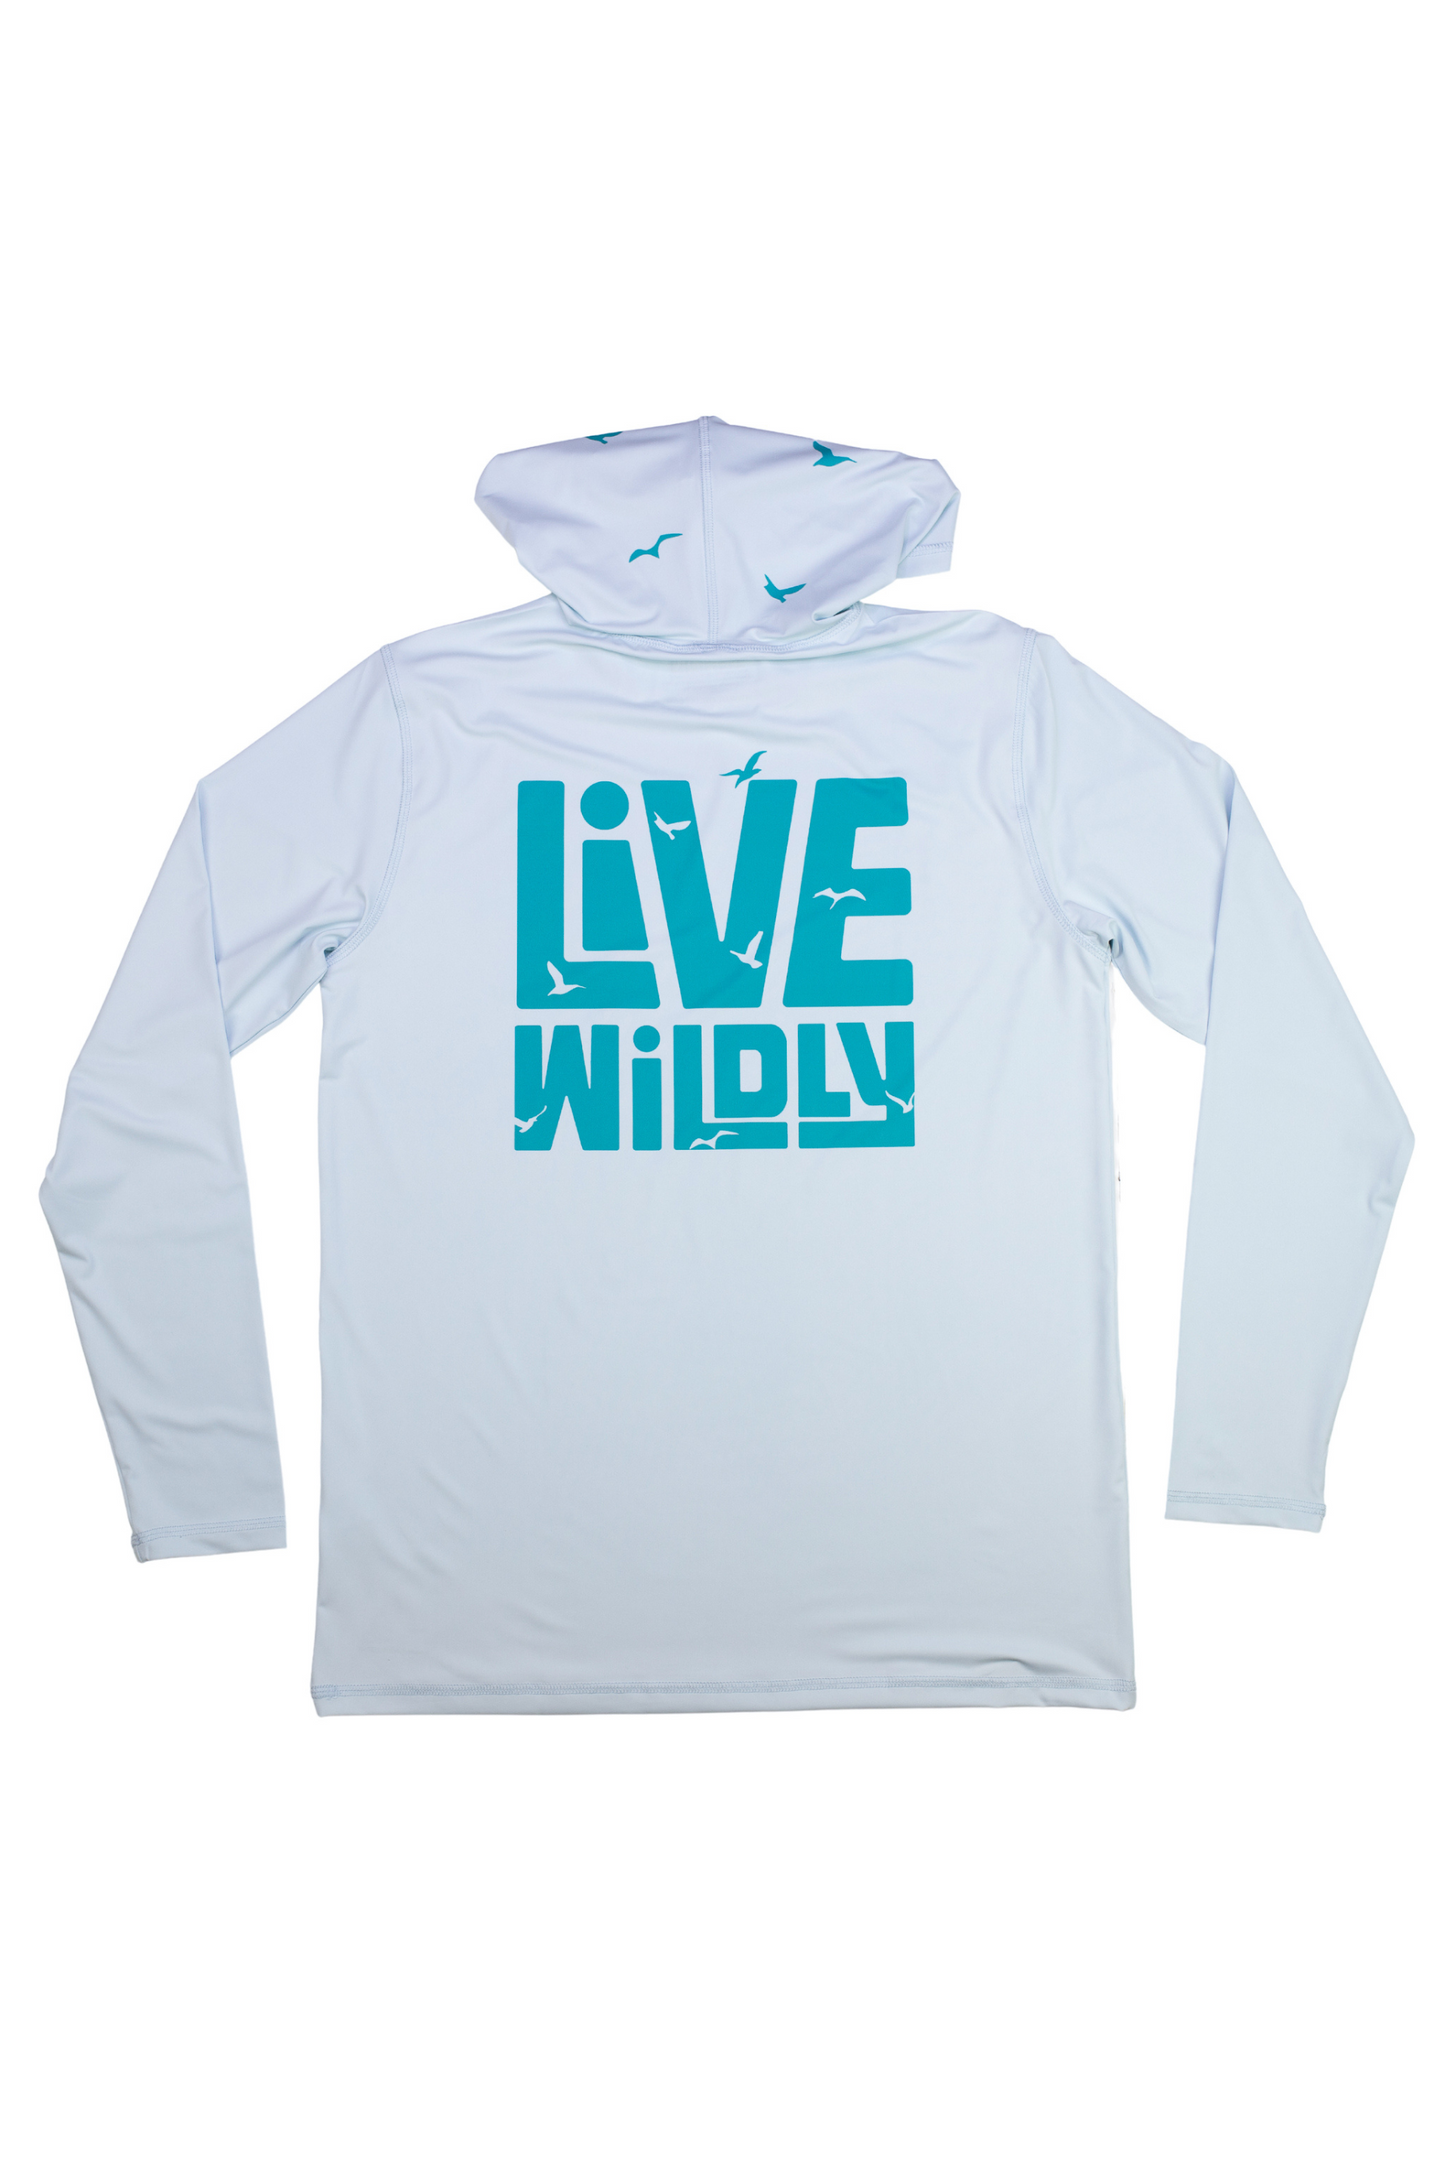 Live Wildly Unisex UPF 50+ Performance Shirt - Spring Blue - Inside Hood - Live Wildly 